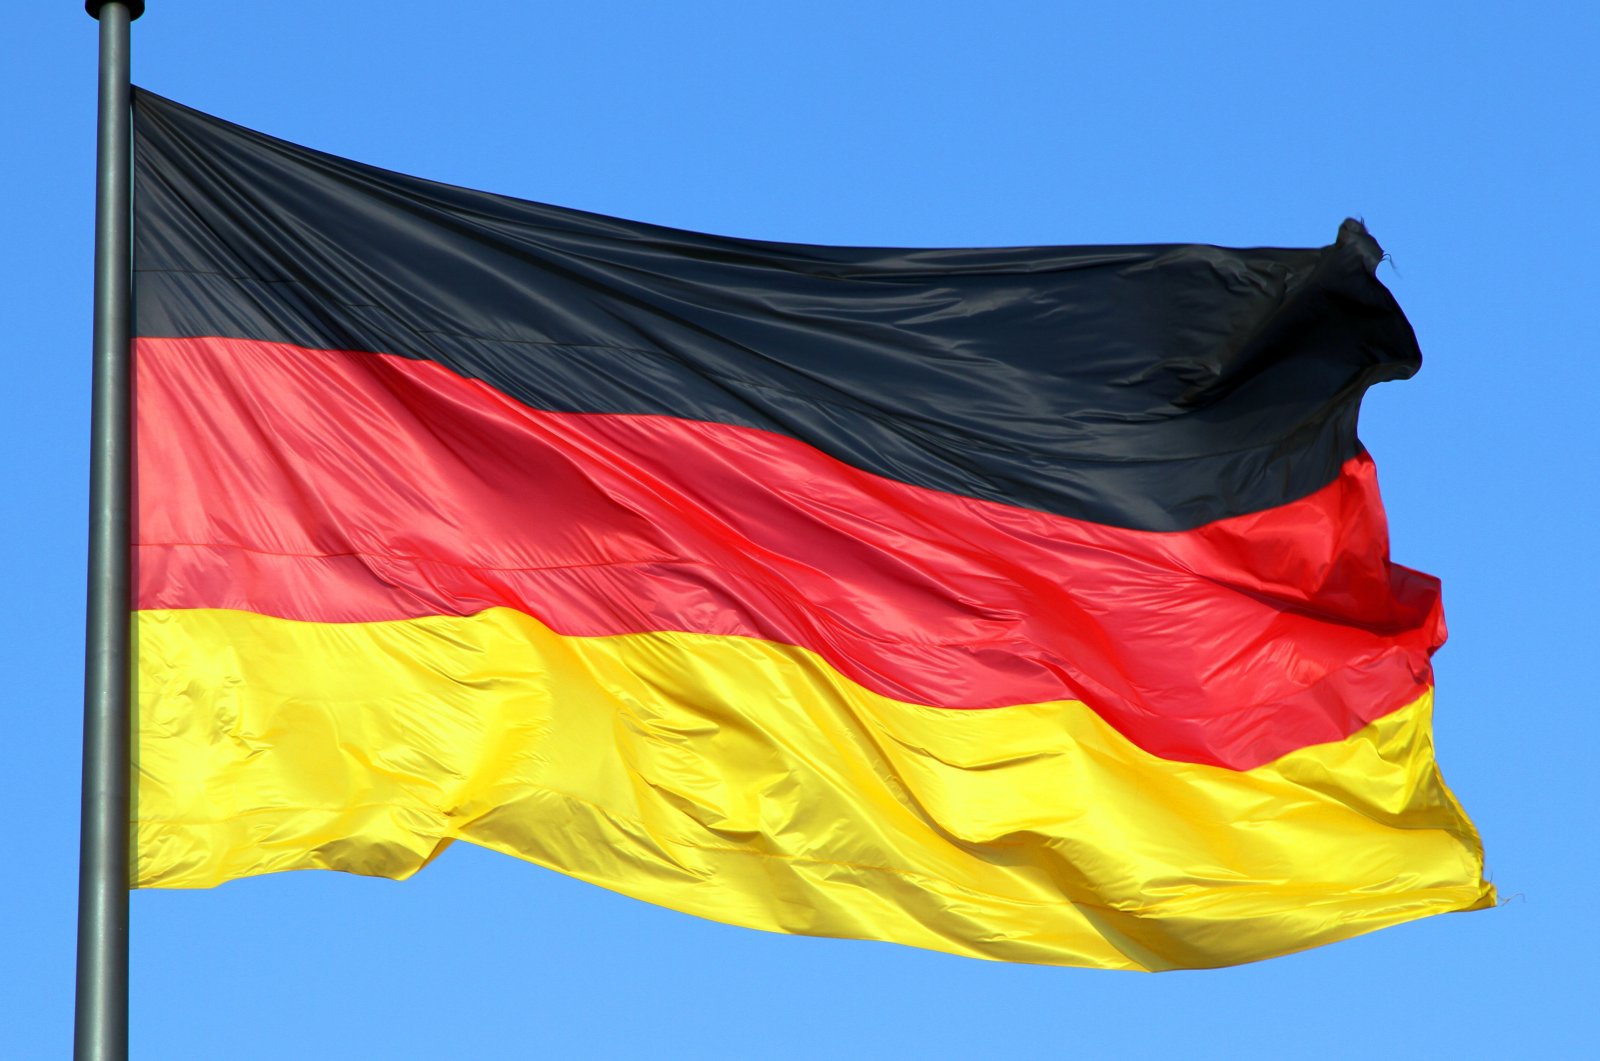 The German flag waving in the air. (Shutterstock)